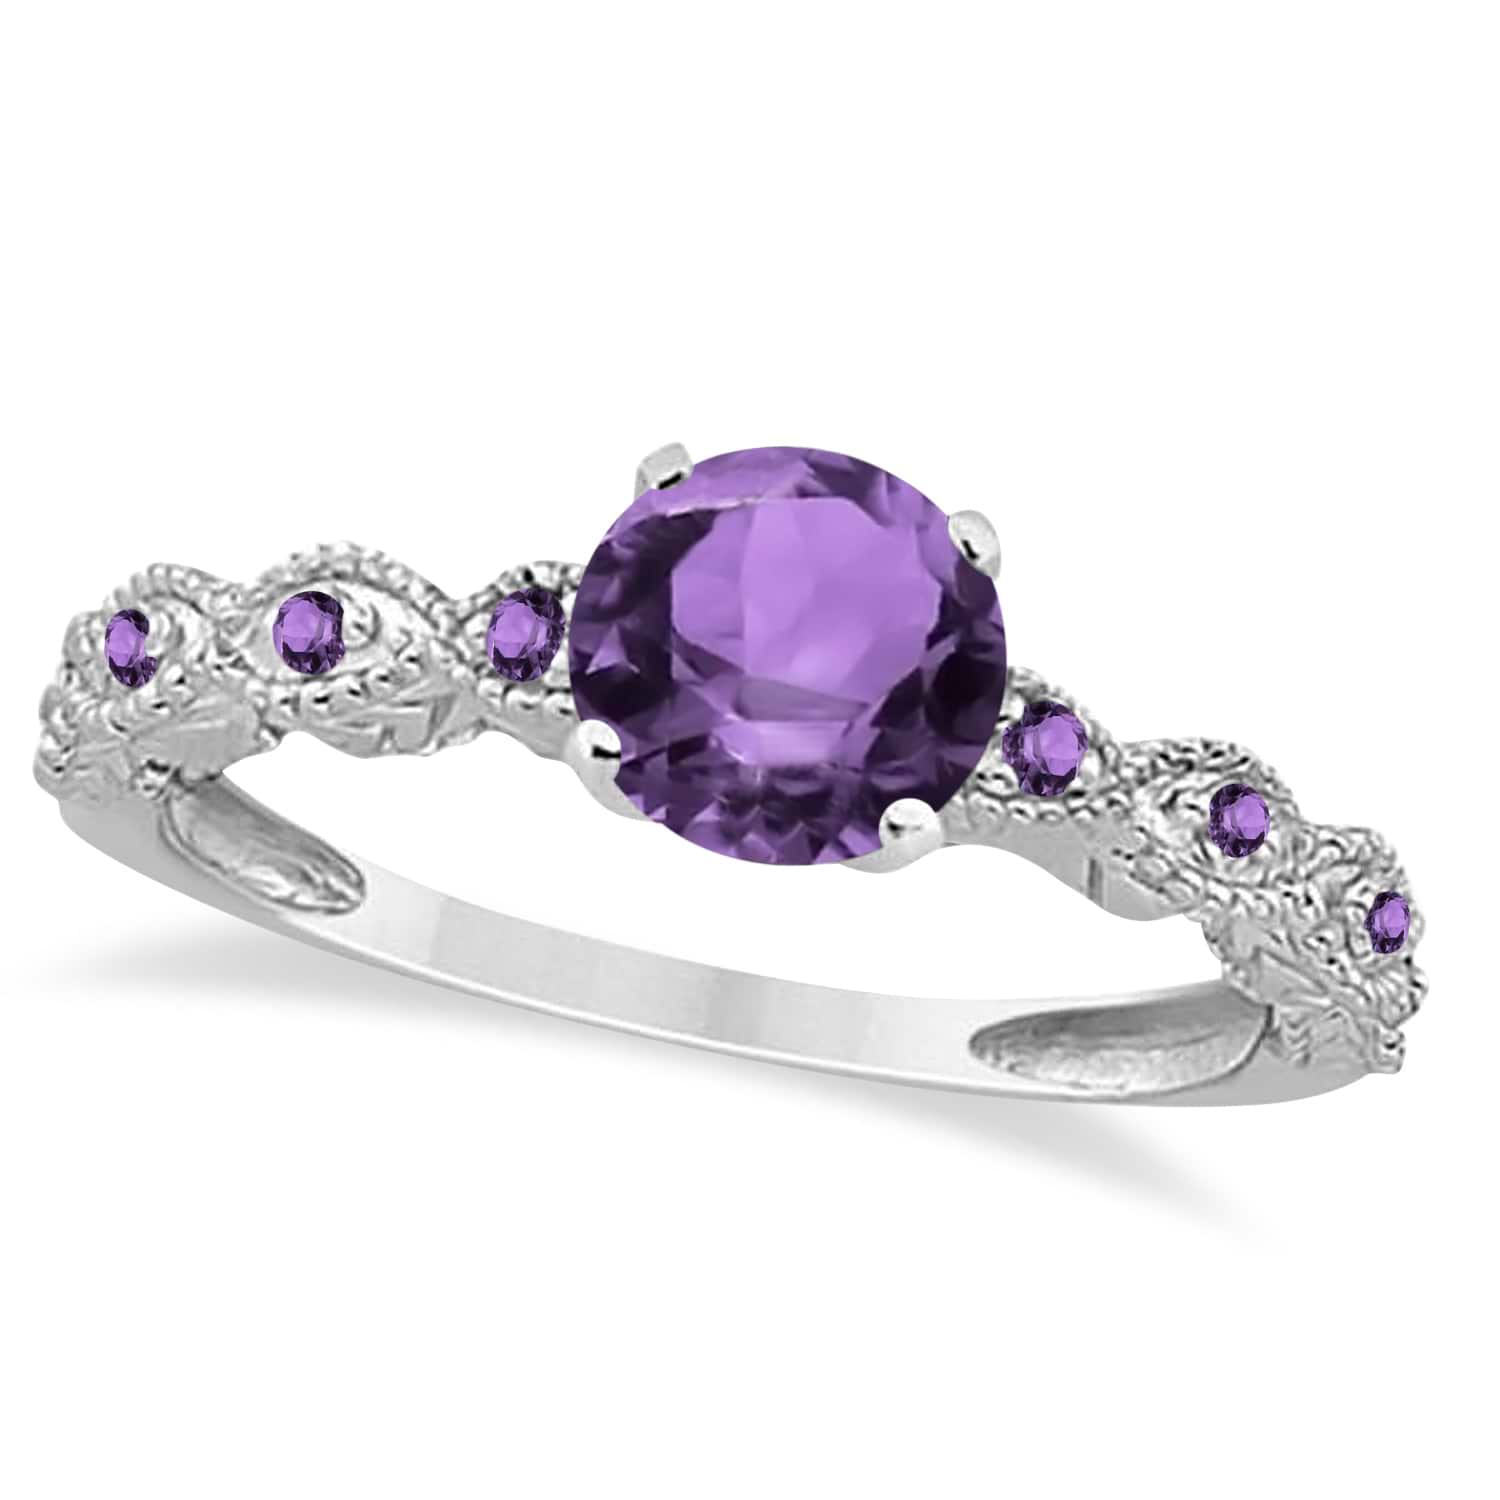 Vintage Style Amethyst Engagement Ring in 18k White Gold (1.18ct)